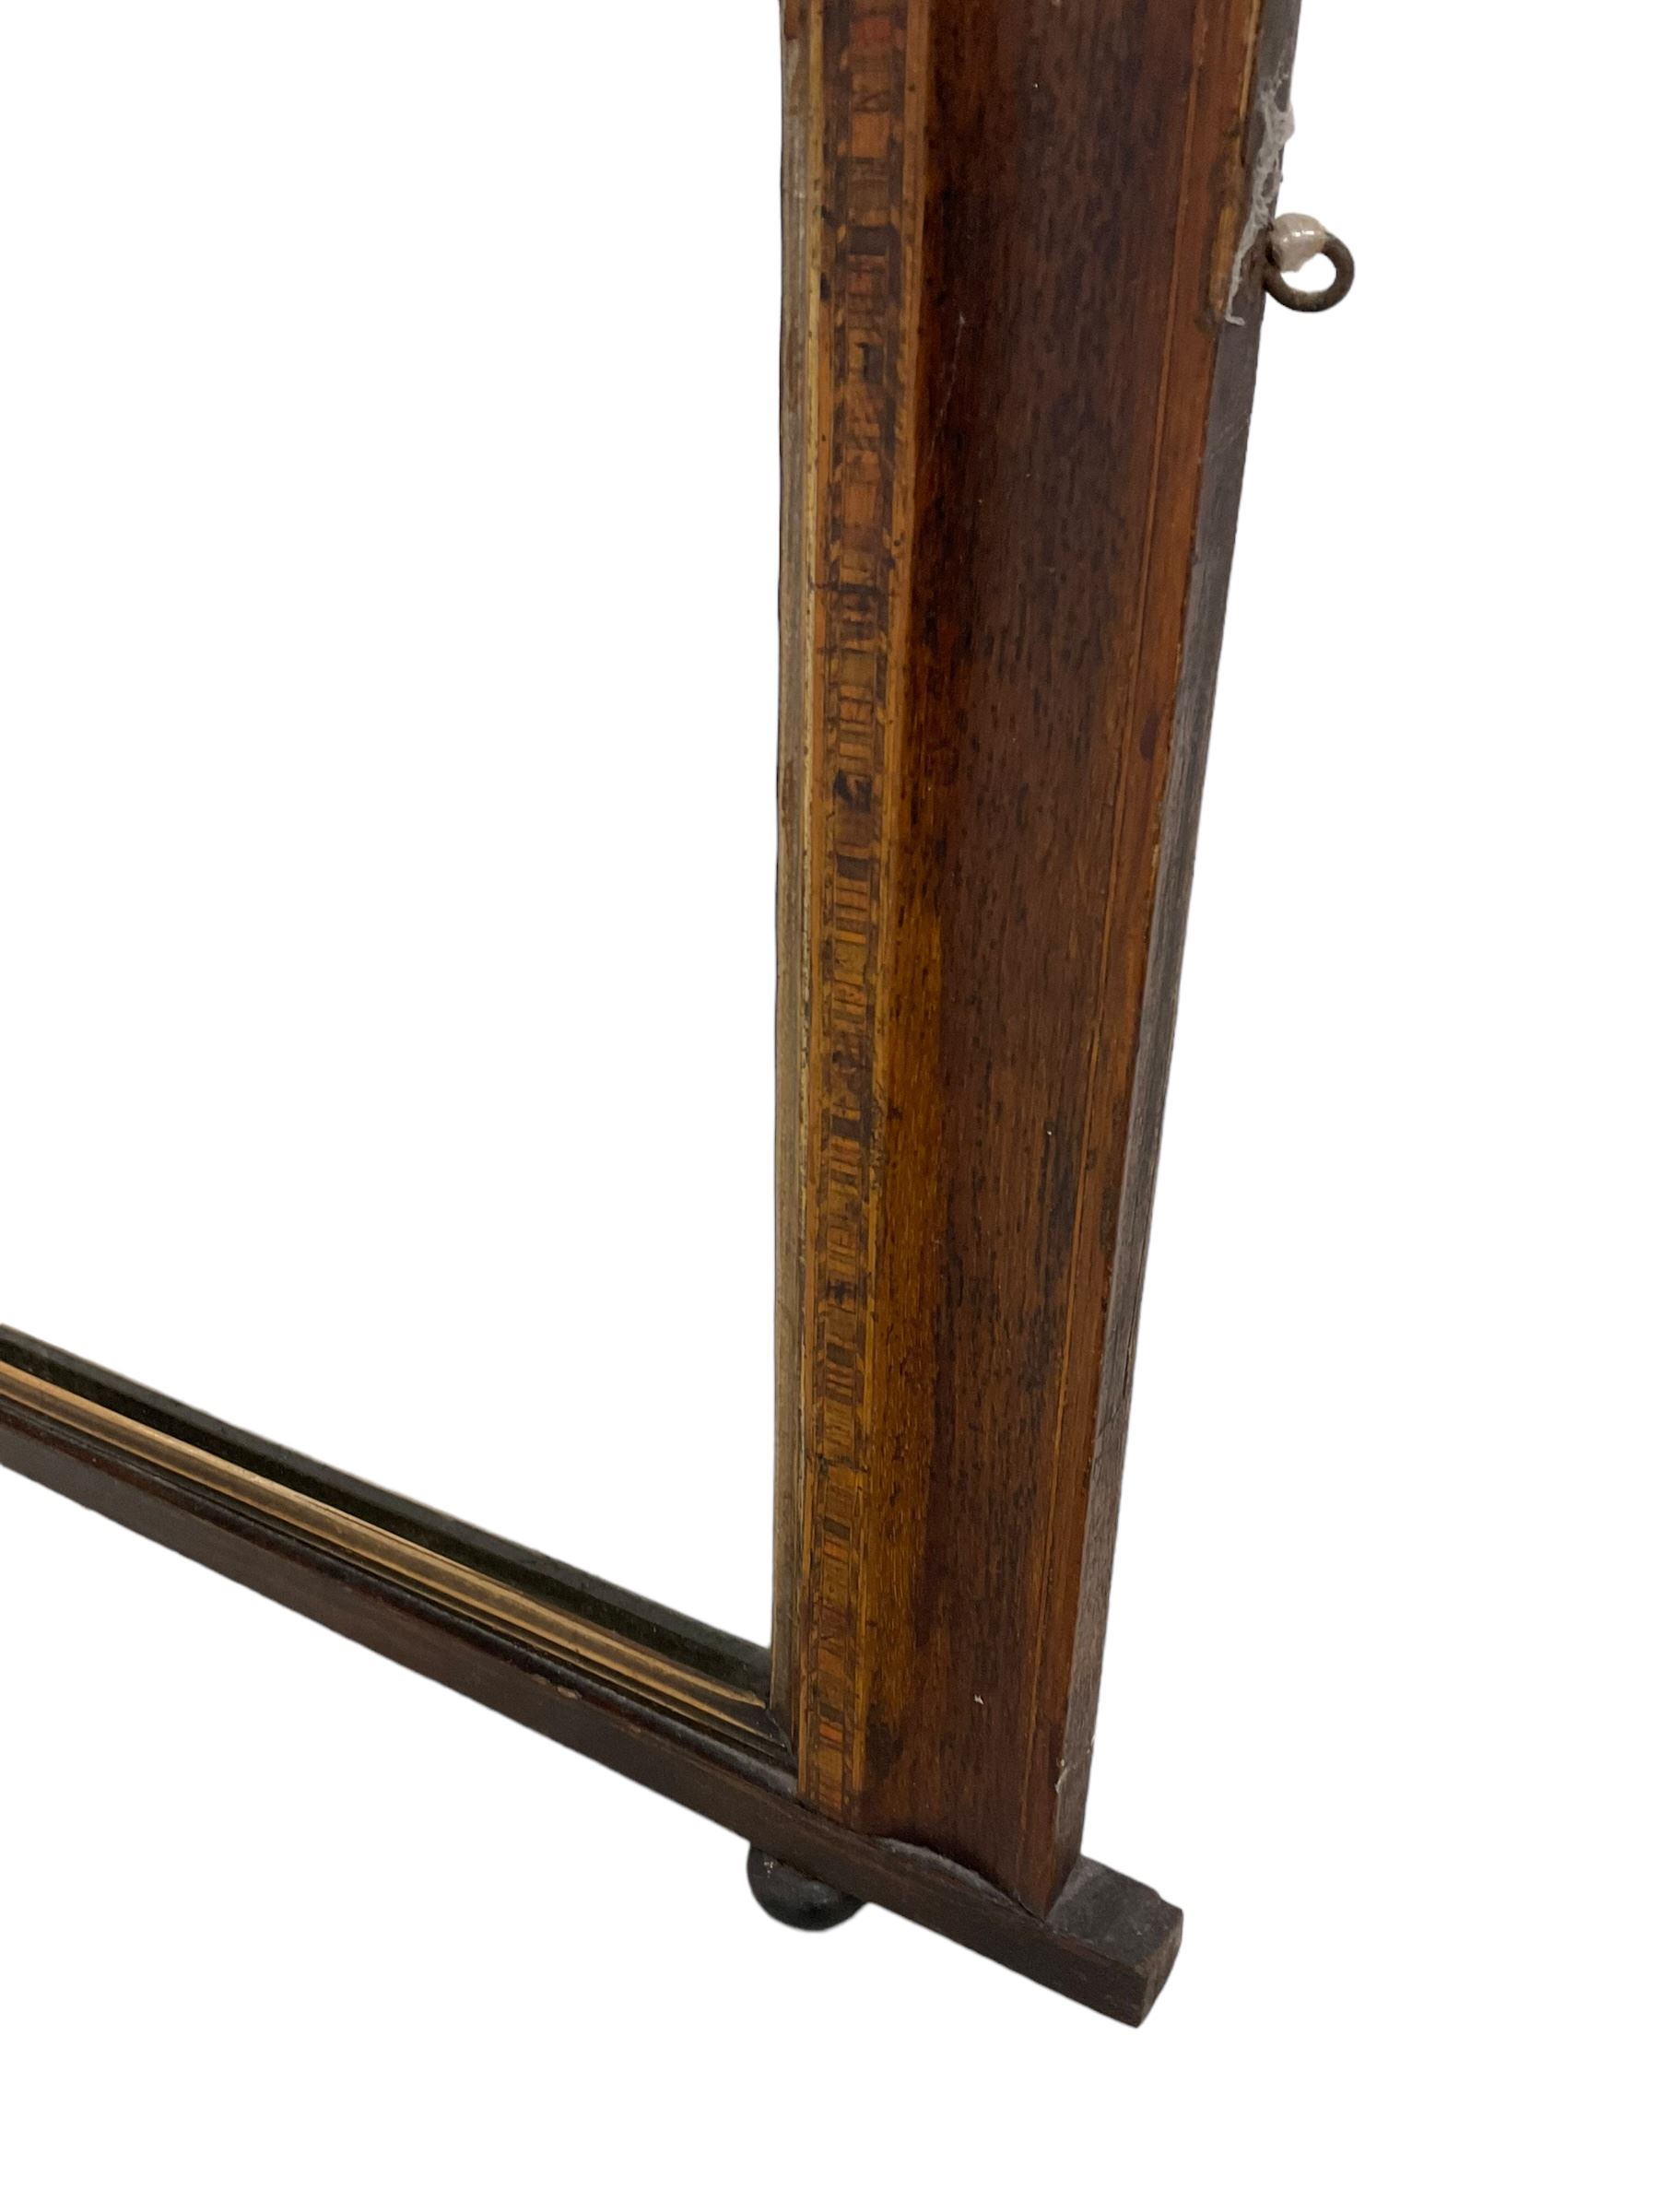 Victorian rosewood overmantel mirror - Image 3 of 4